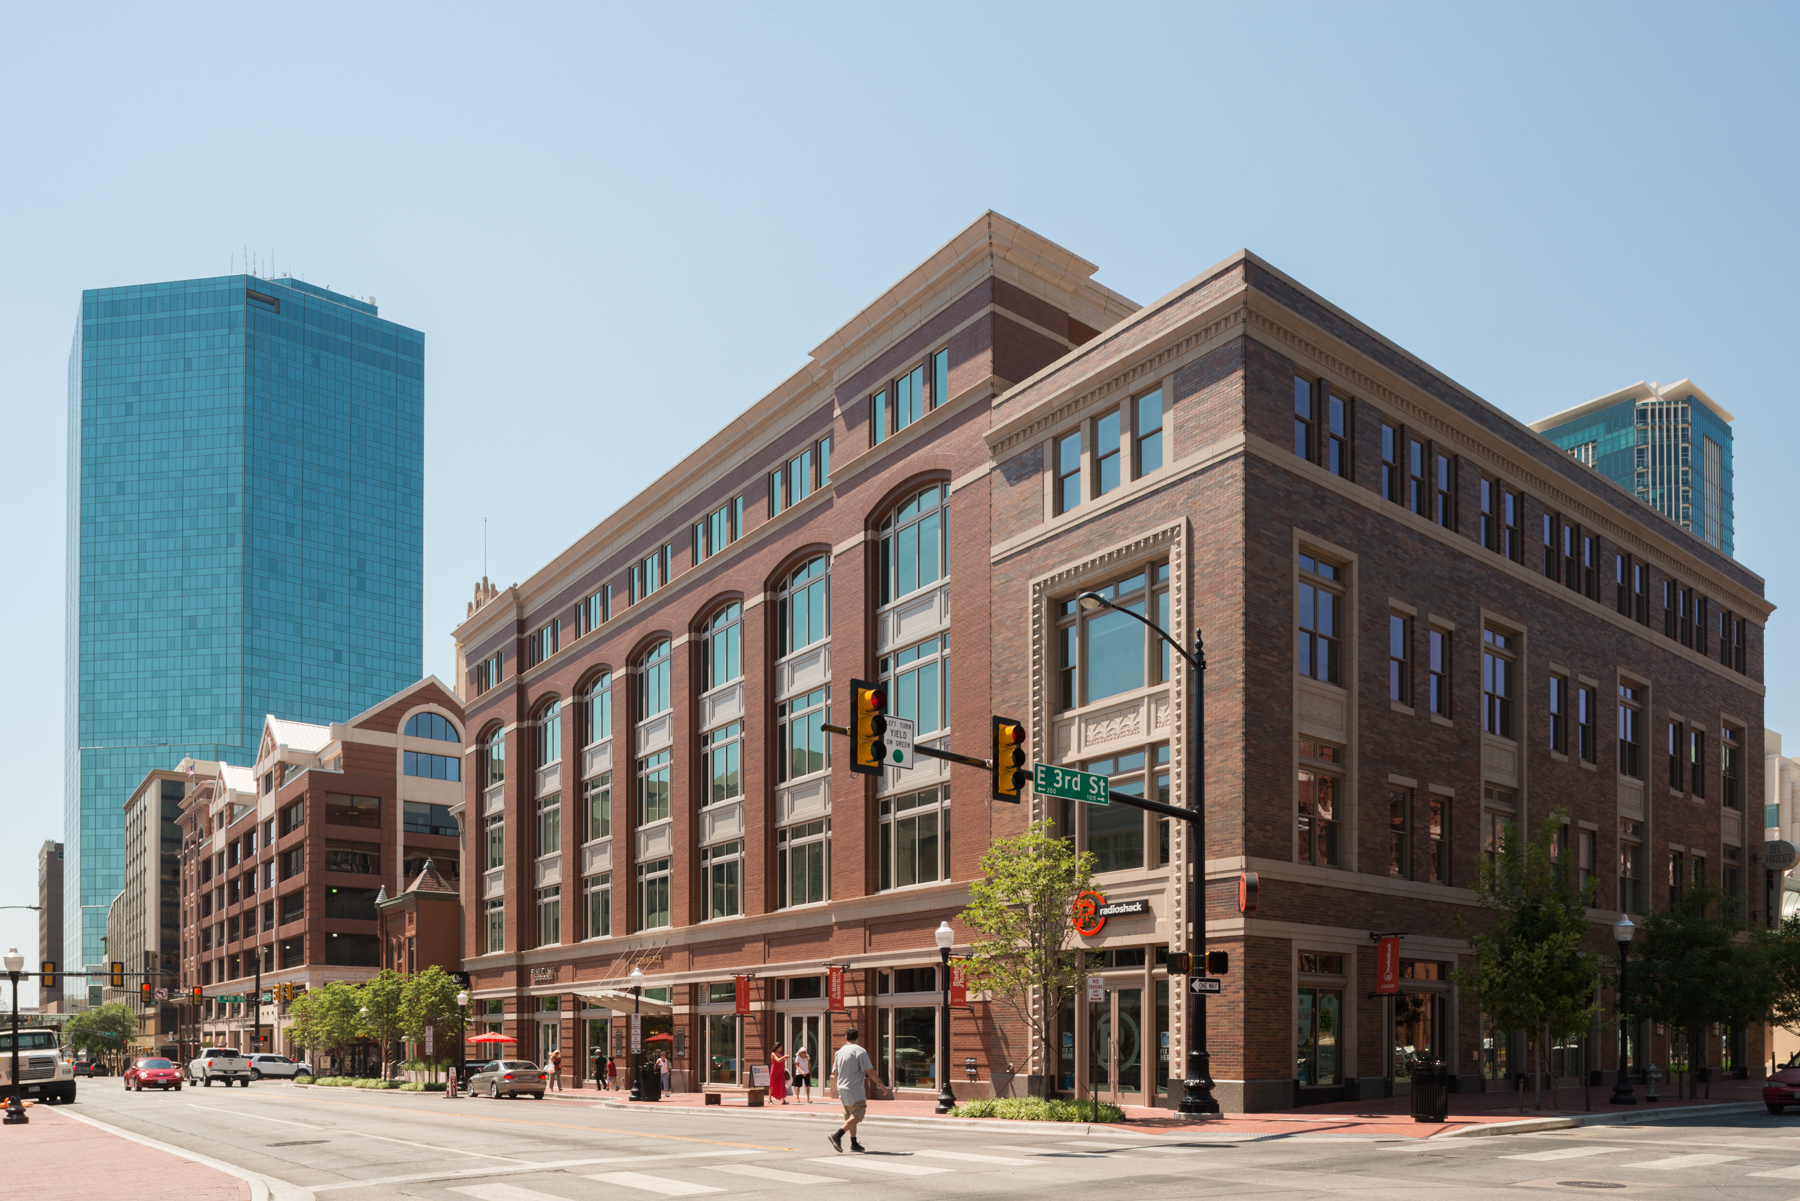 Sundance Square's Commerce Building was also a Best in Class winner in the 2014 Brick in Architecture competition.